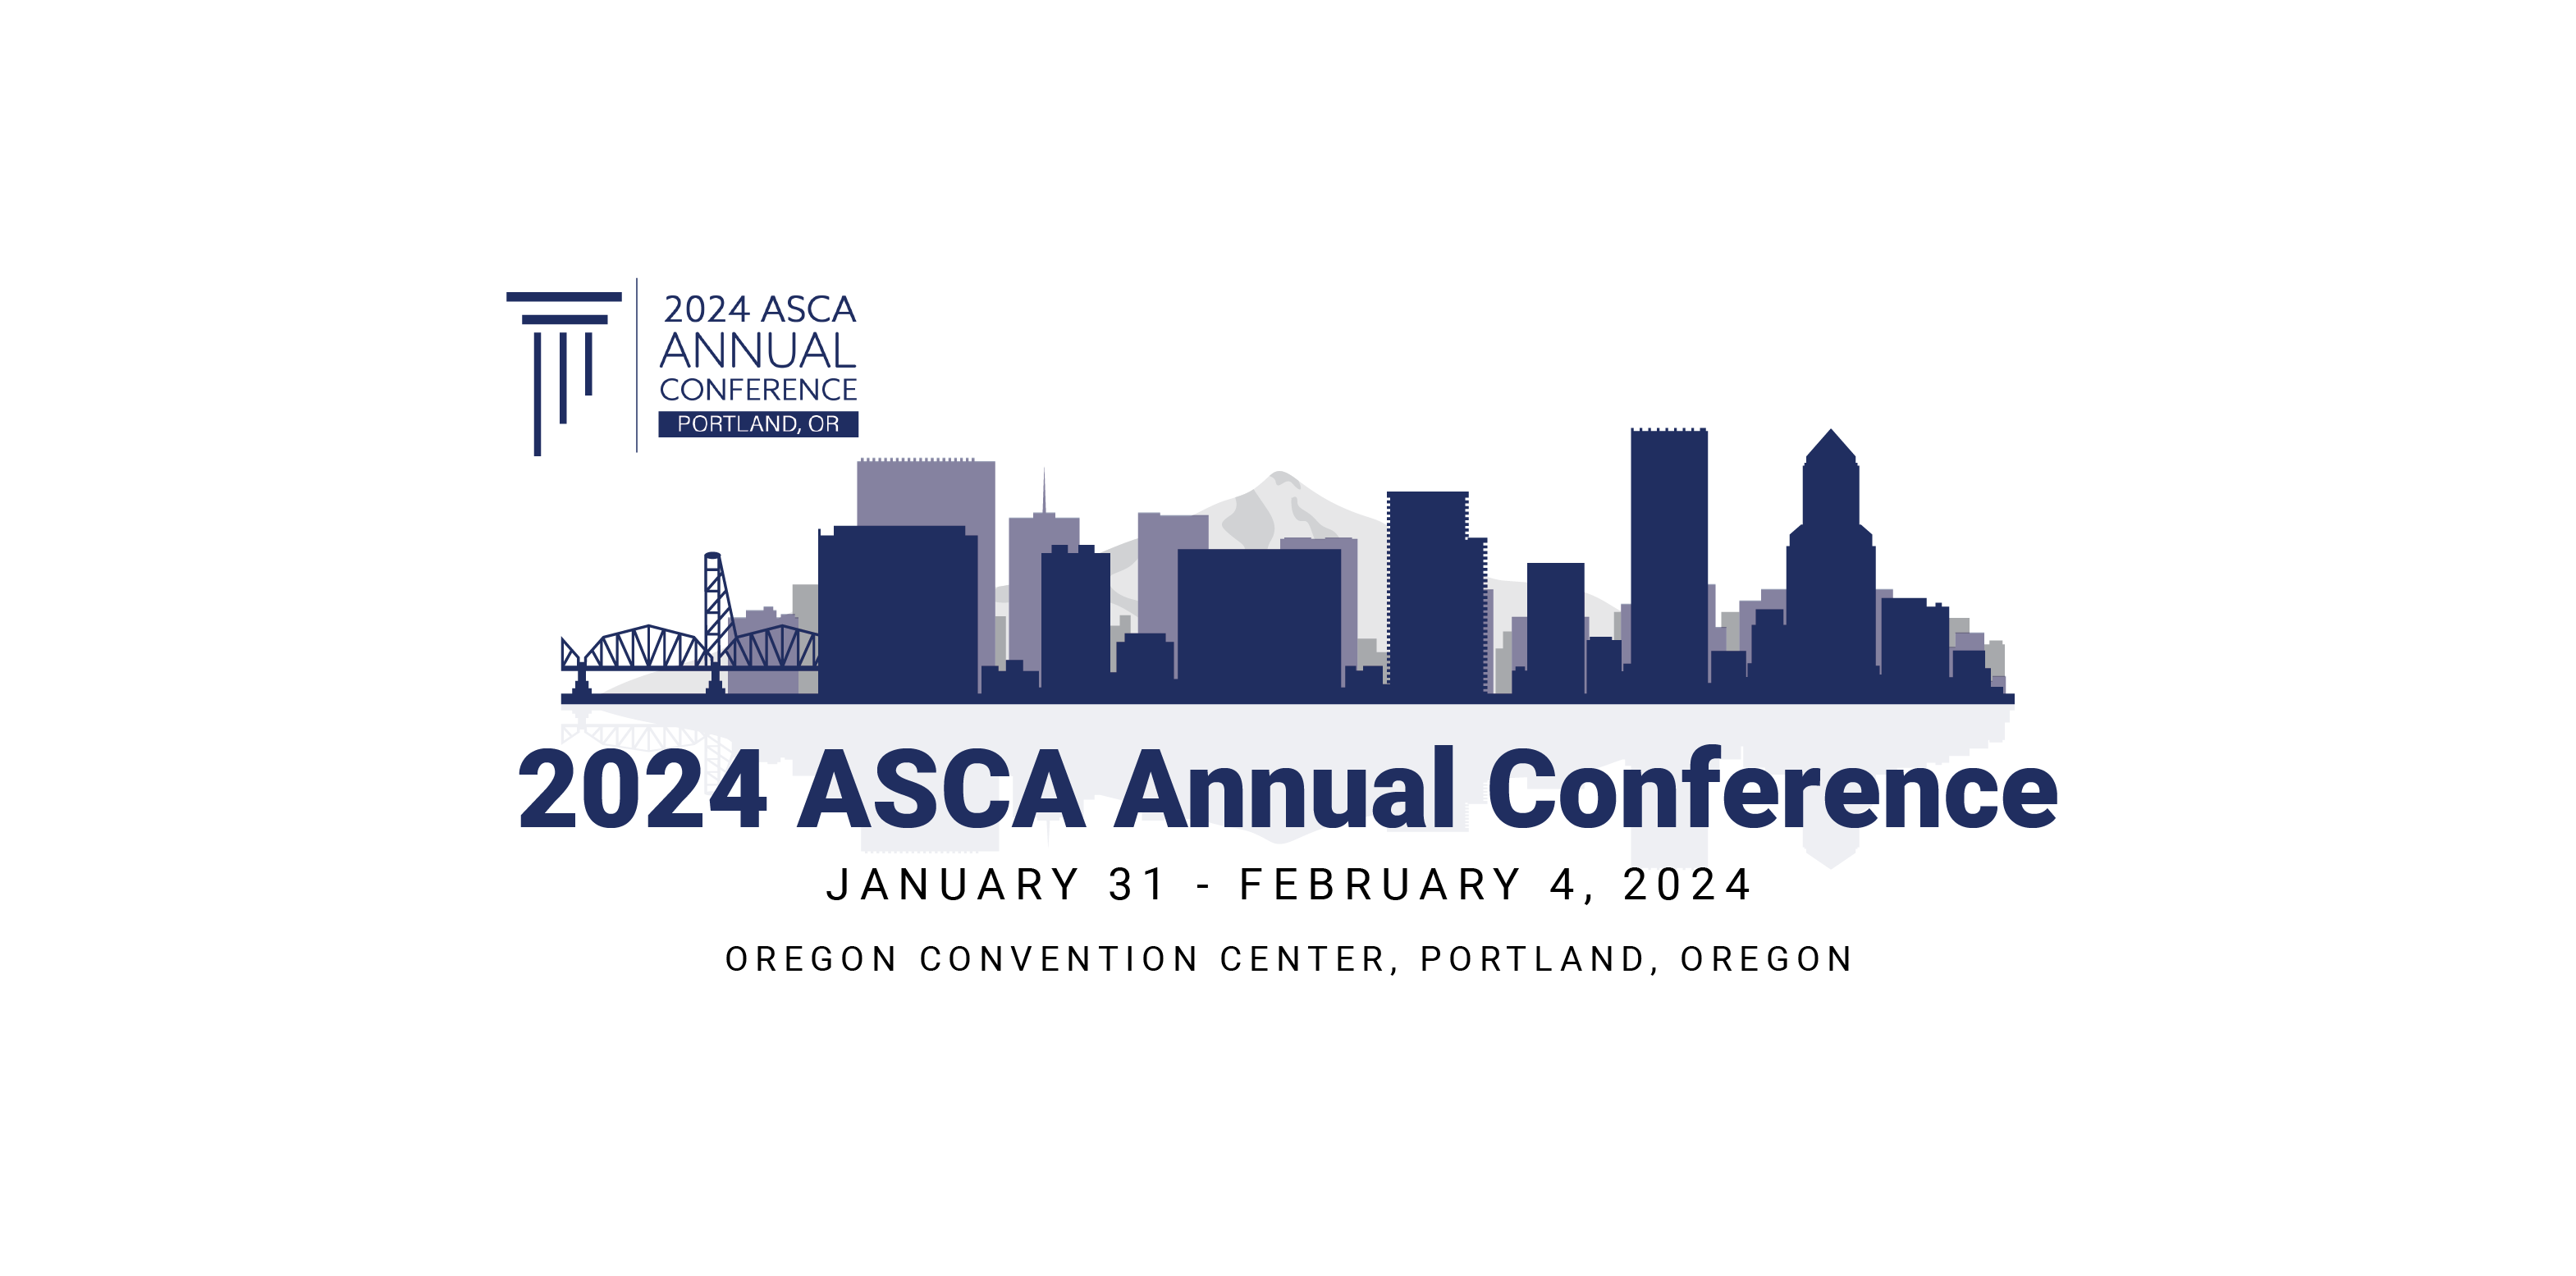 ASCA Conference 2024 Association for Student Conduct Administration